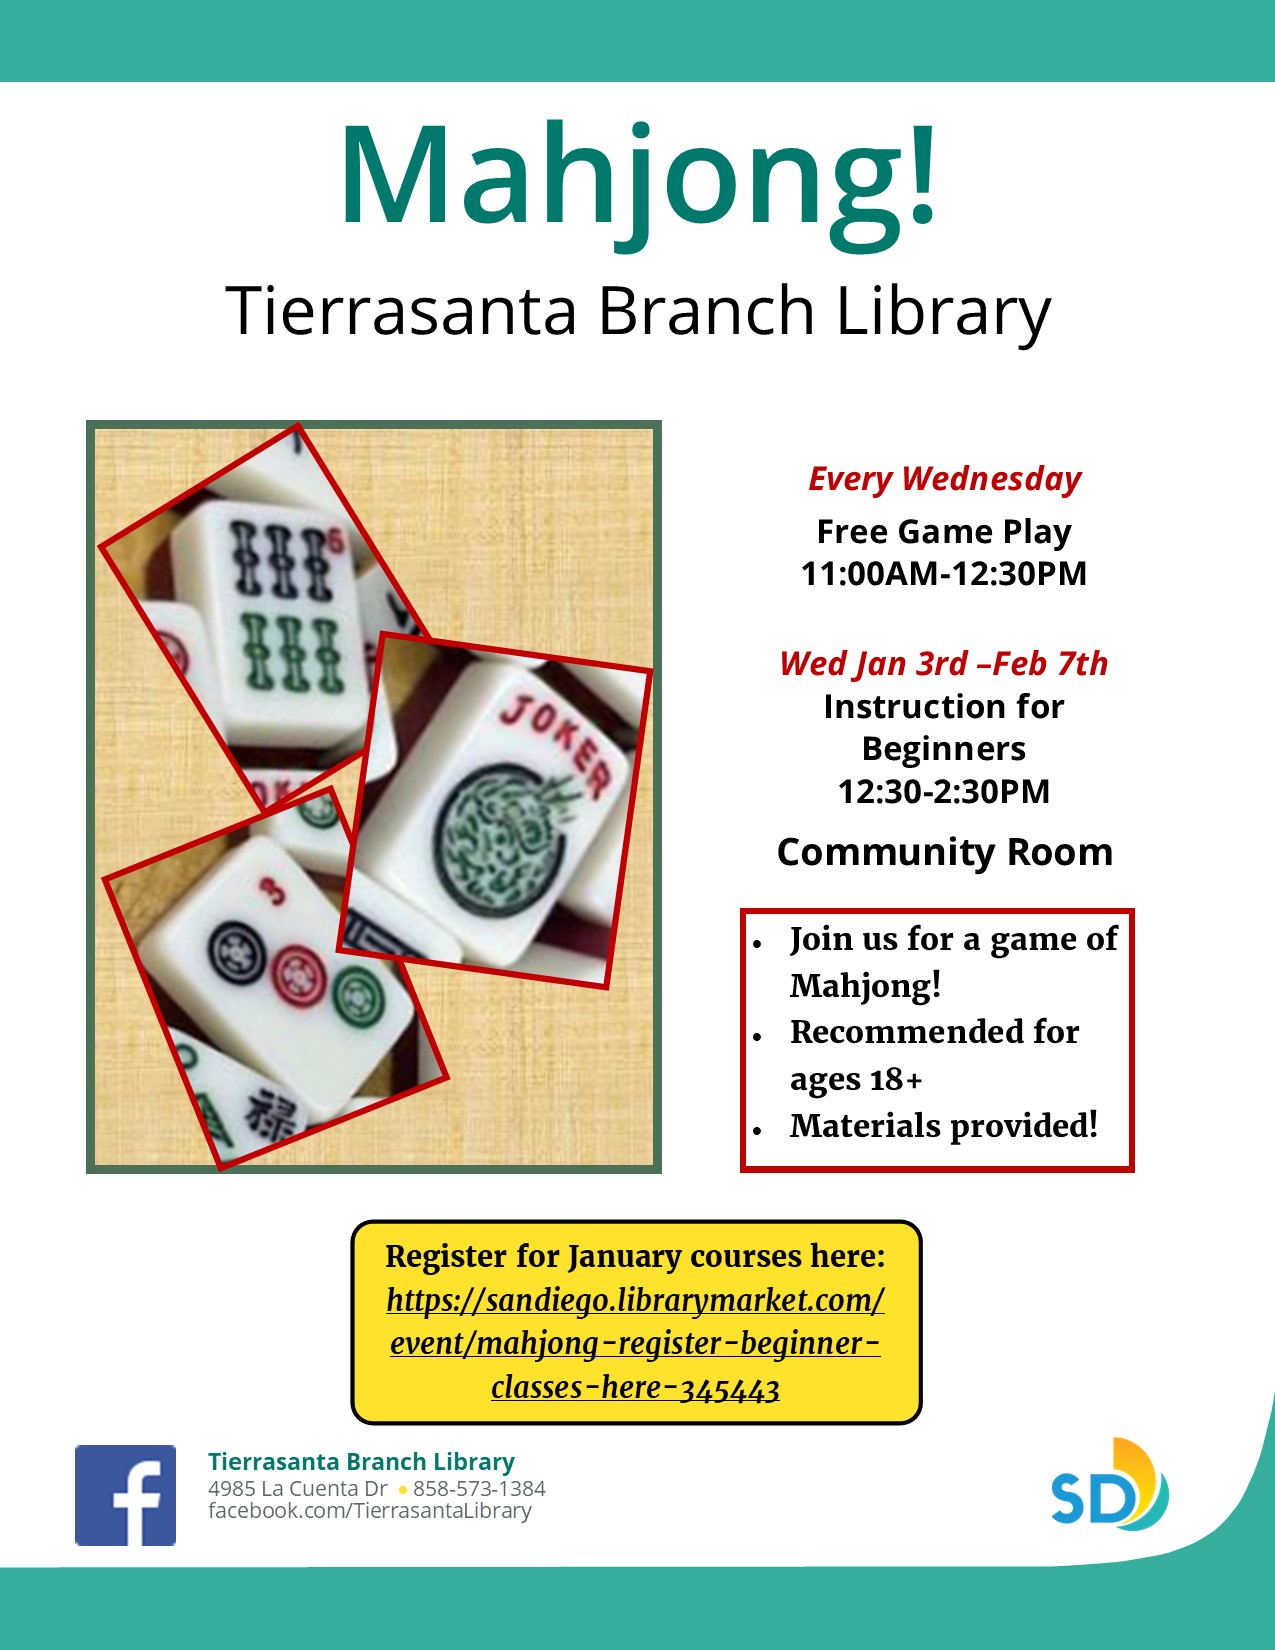 Mahjong Beginner Classes flyer with information and images of mahjong tiles.